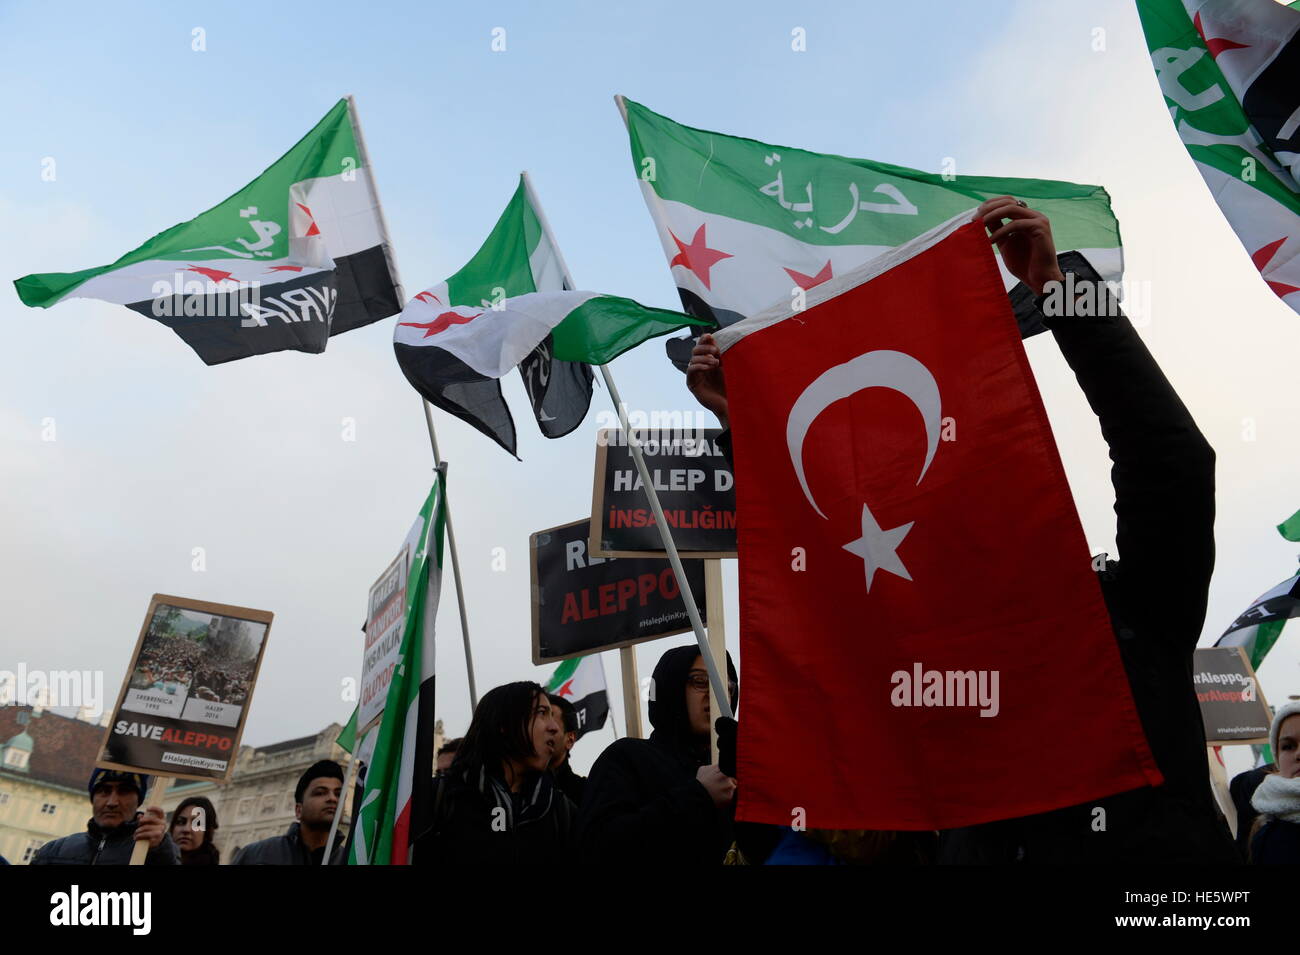 Vienna, Austria. Dec. 17th, 2016. Demonstration, stand up for Aleppo in Vienna at Heldenplatz. The Islamic Federation in Vienna called for the demonstration. 500 people have followed this call. © Franz Perc/Alamy Live News Stock Photo